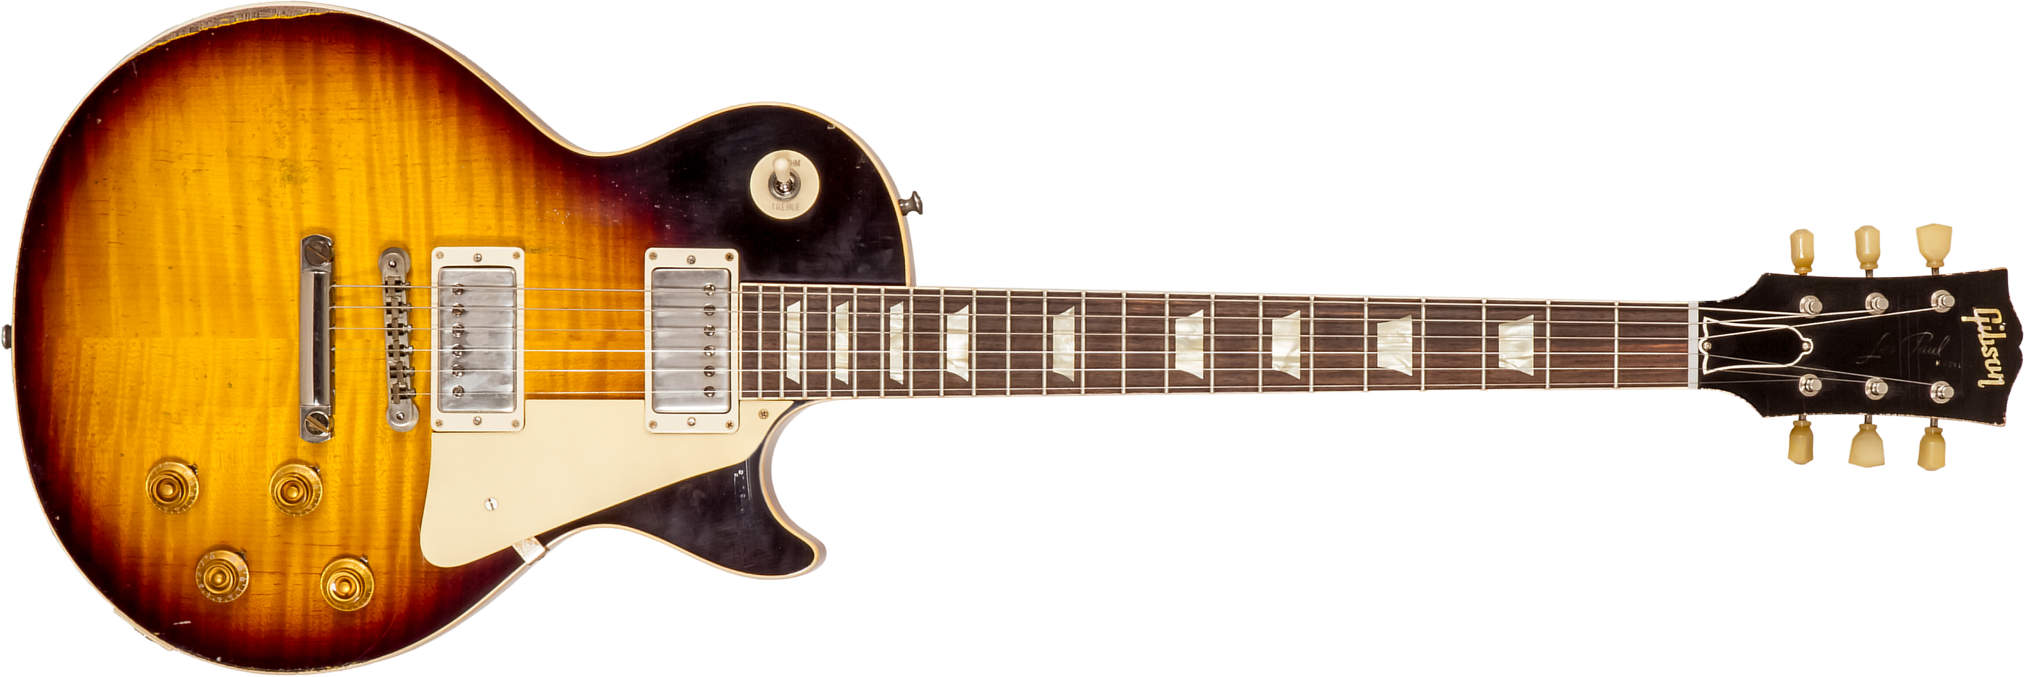 Gibson Custom Shop M2m Les Paul Standard 1959 Reissue 2h Ht Rw #932158 - Ultra Heavy Aged Kindred Burst - Single cut electric guitar - Main picture